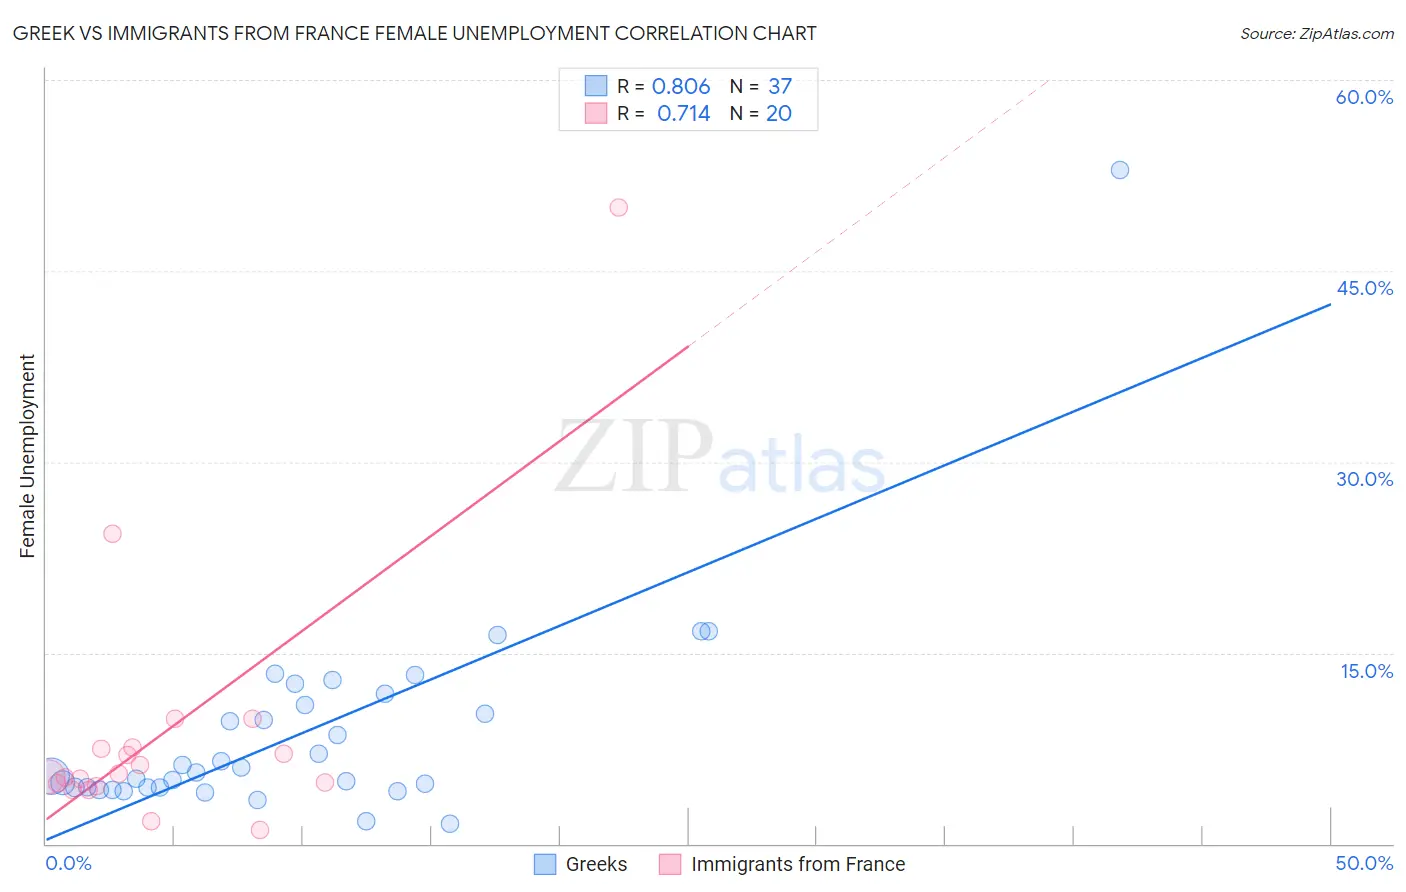 Greek vs Immigrants from France Female Unemployment